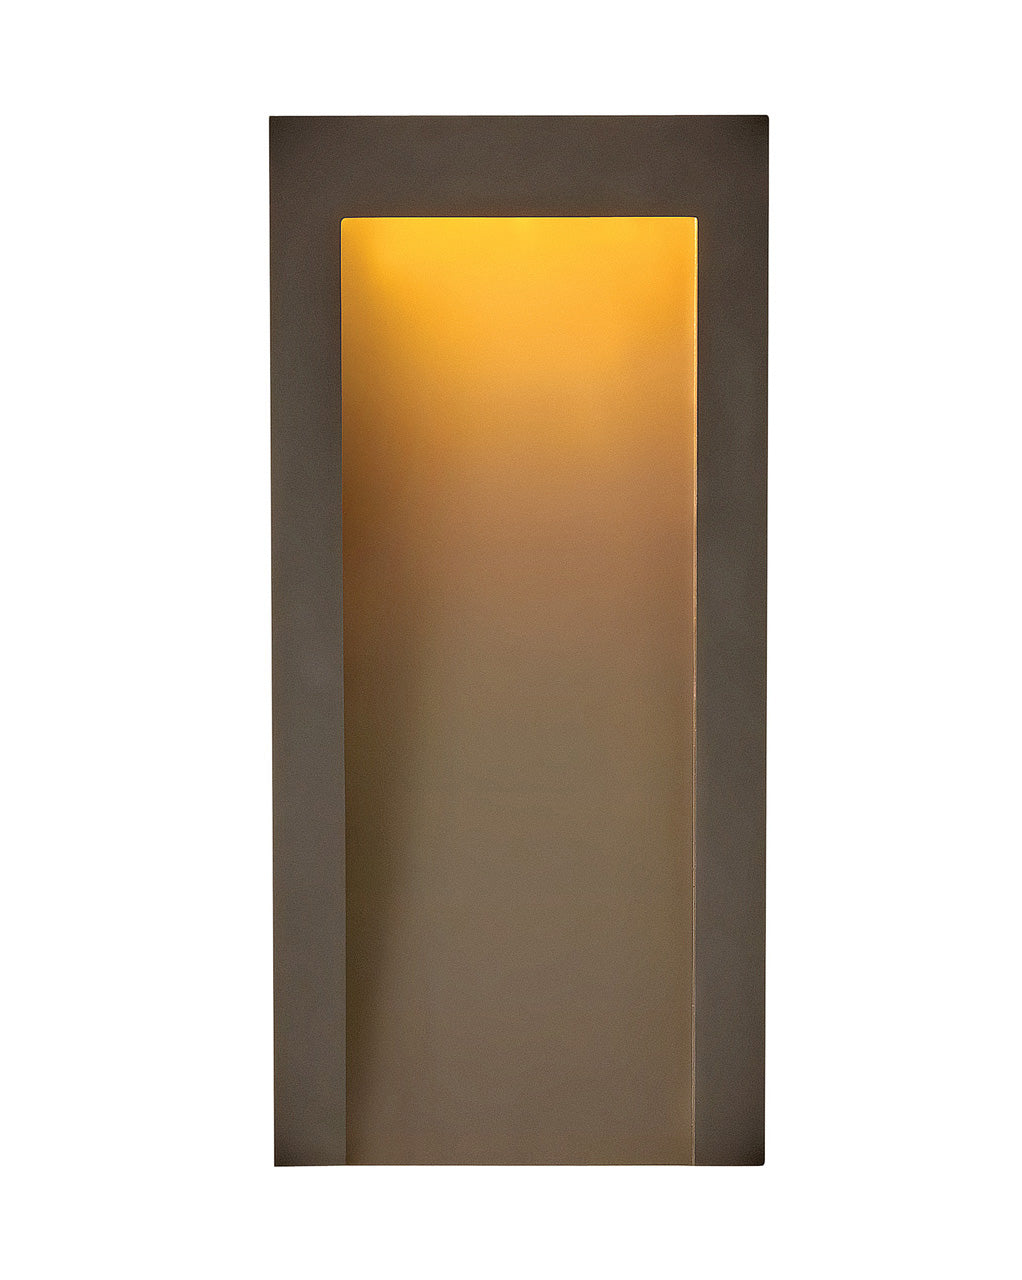 OUTDOOR TAPER Wall Mount Lantern Outdoor l Wall Hinkley Textured Oil Rubbed Bronze 3.5x7.0x15.0 